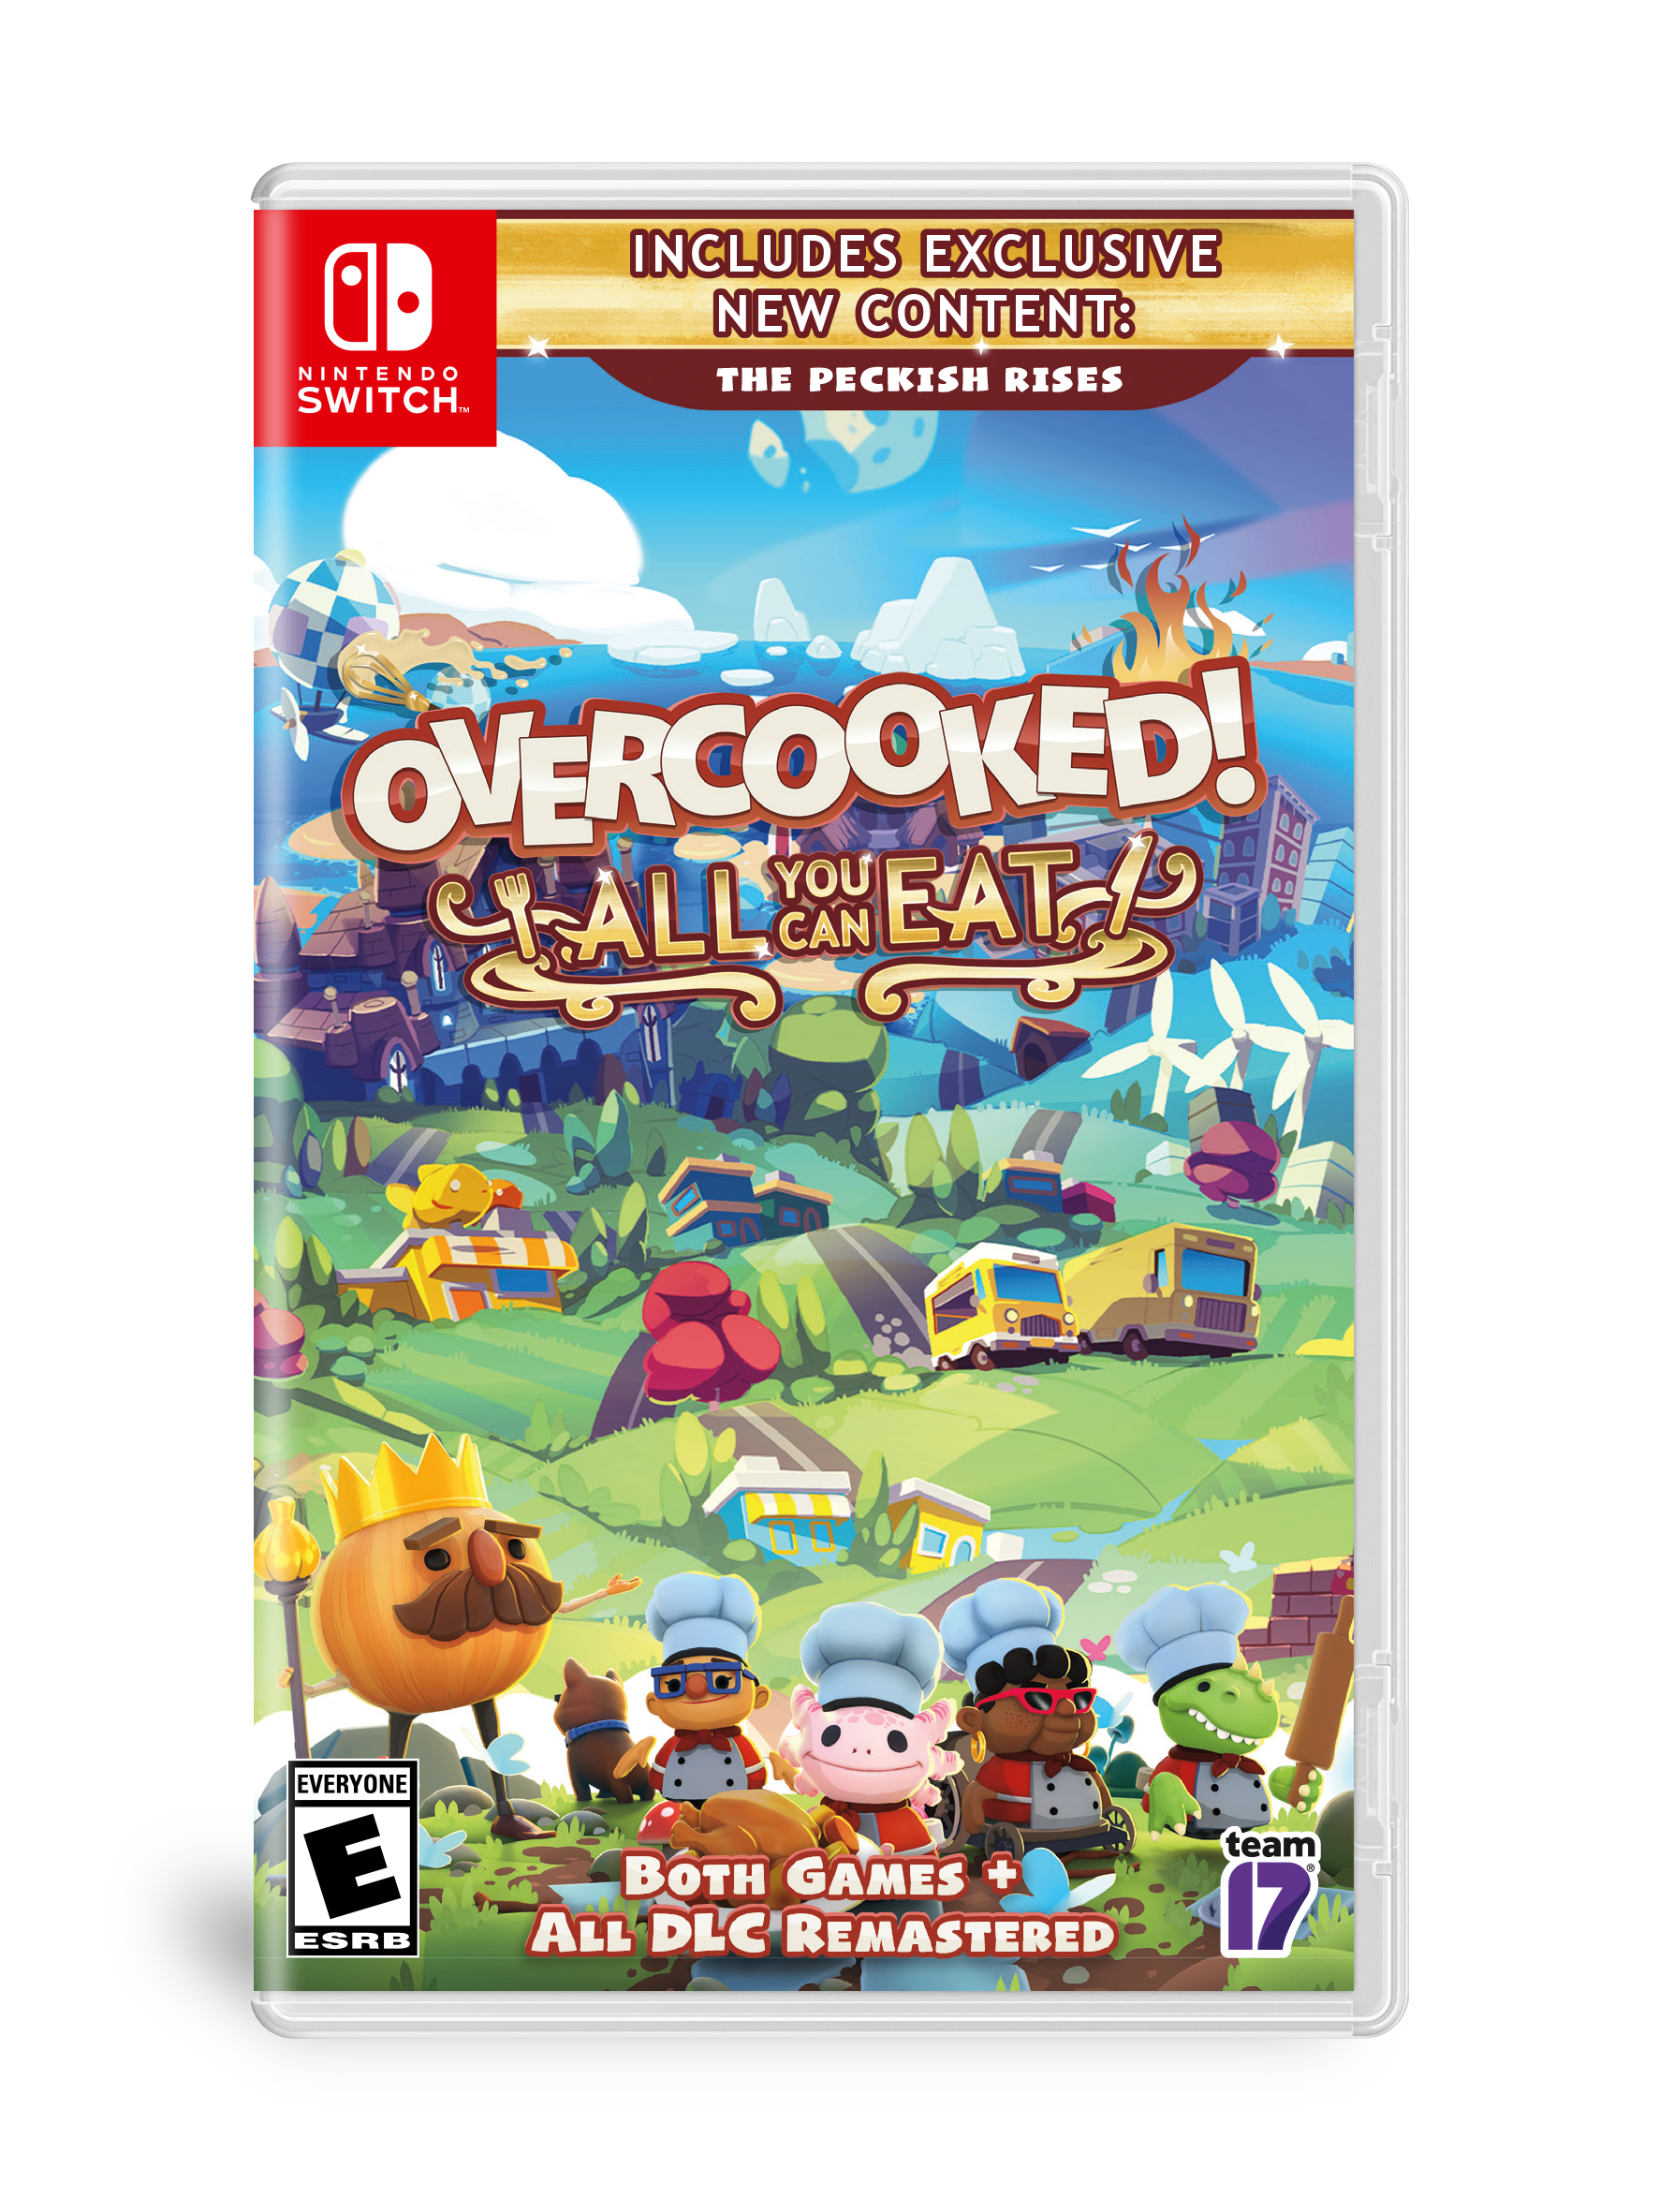 Overcooked! All You Can Eat is Being Delivered Hot and Fresh on